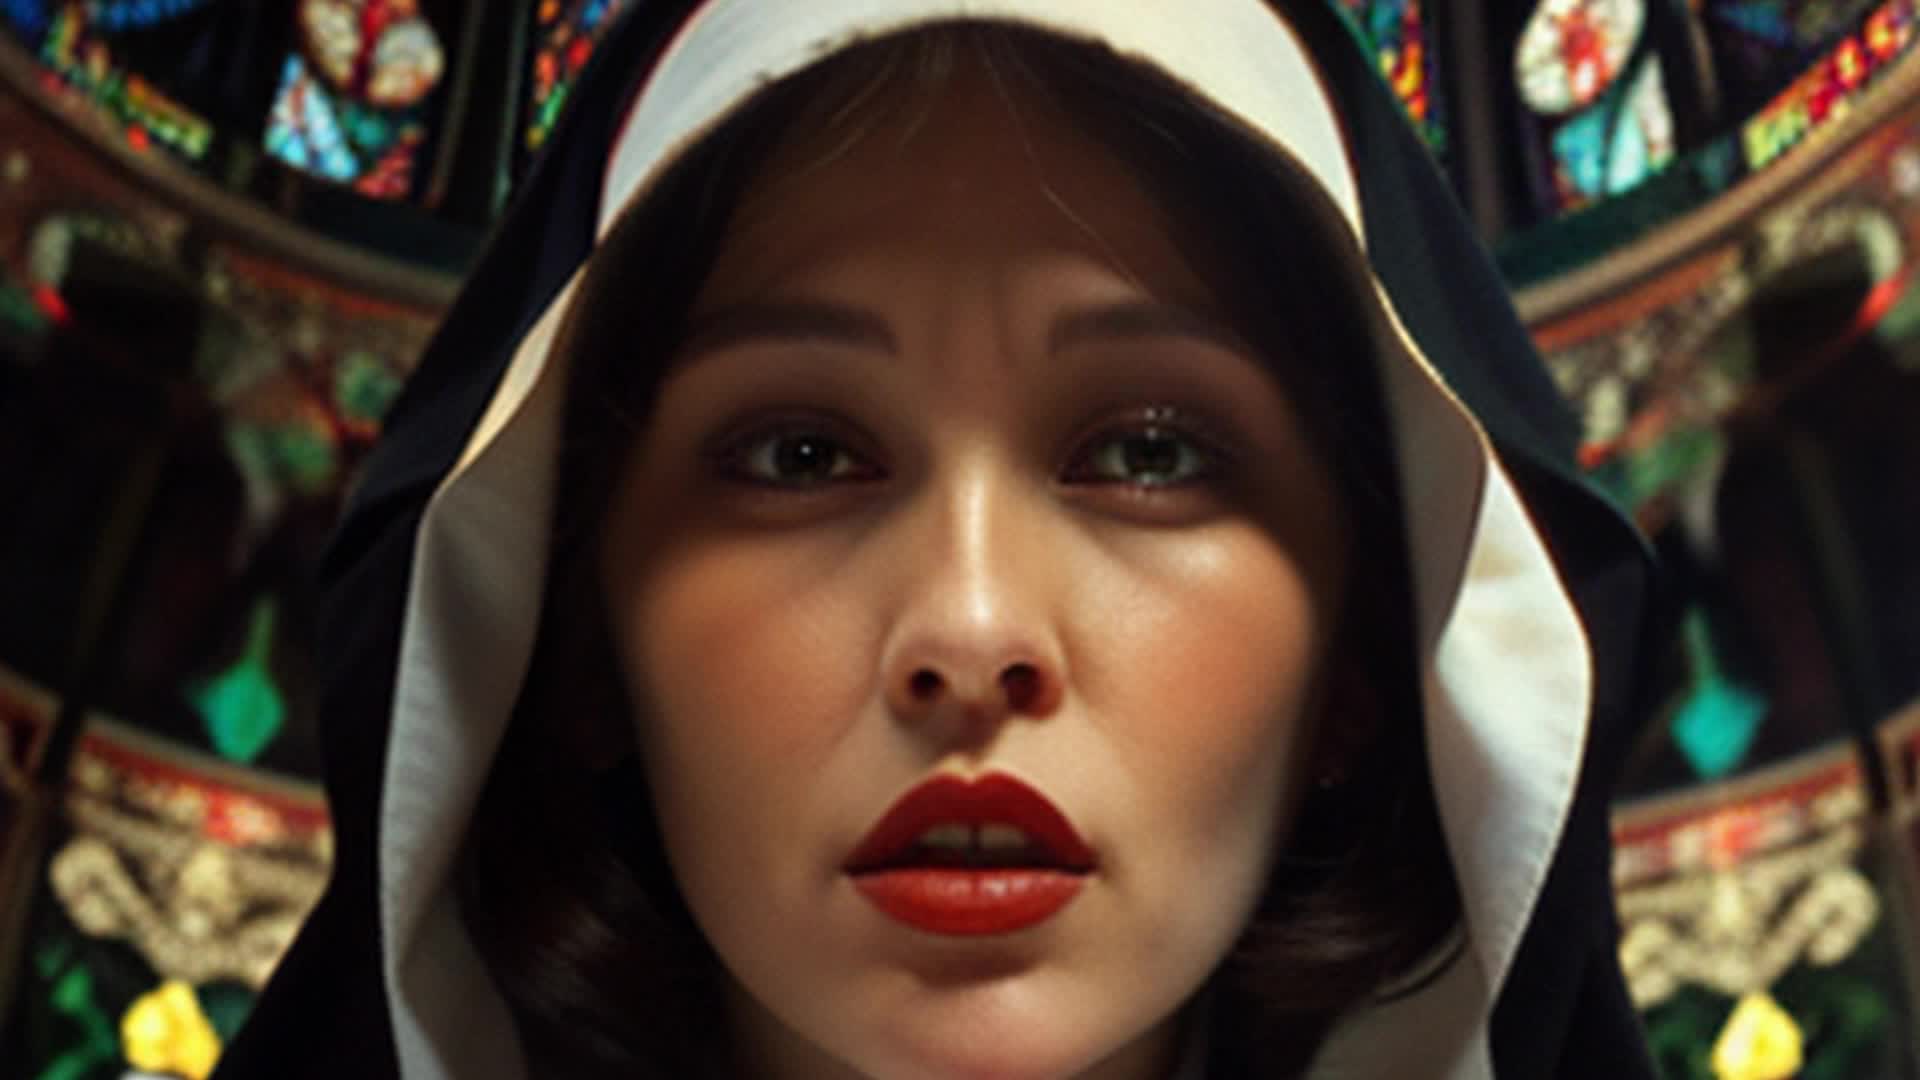 Extreme close up Fractal of the Catholic peekaboo Nuns of the Convent in their Posh habits Psychedelic Fantasy red lipstick Big 1980s Hair Religious Feathers Royalty Luxurious Fractals In the style of Stained Glass Apostolnik scarf Extreme close up Extreme close up Fractal of the Catholic peekaboo Nuns of the Convent in their Posh habits Psychedelic Fantasy red lipstick Big 1980s Hair Religious Feathers Royalty Luxurious Fractals In the style of Stained Glass Apostolnik scarf Extreme close up